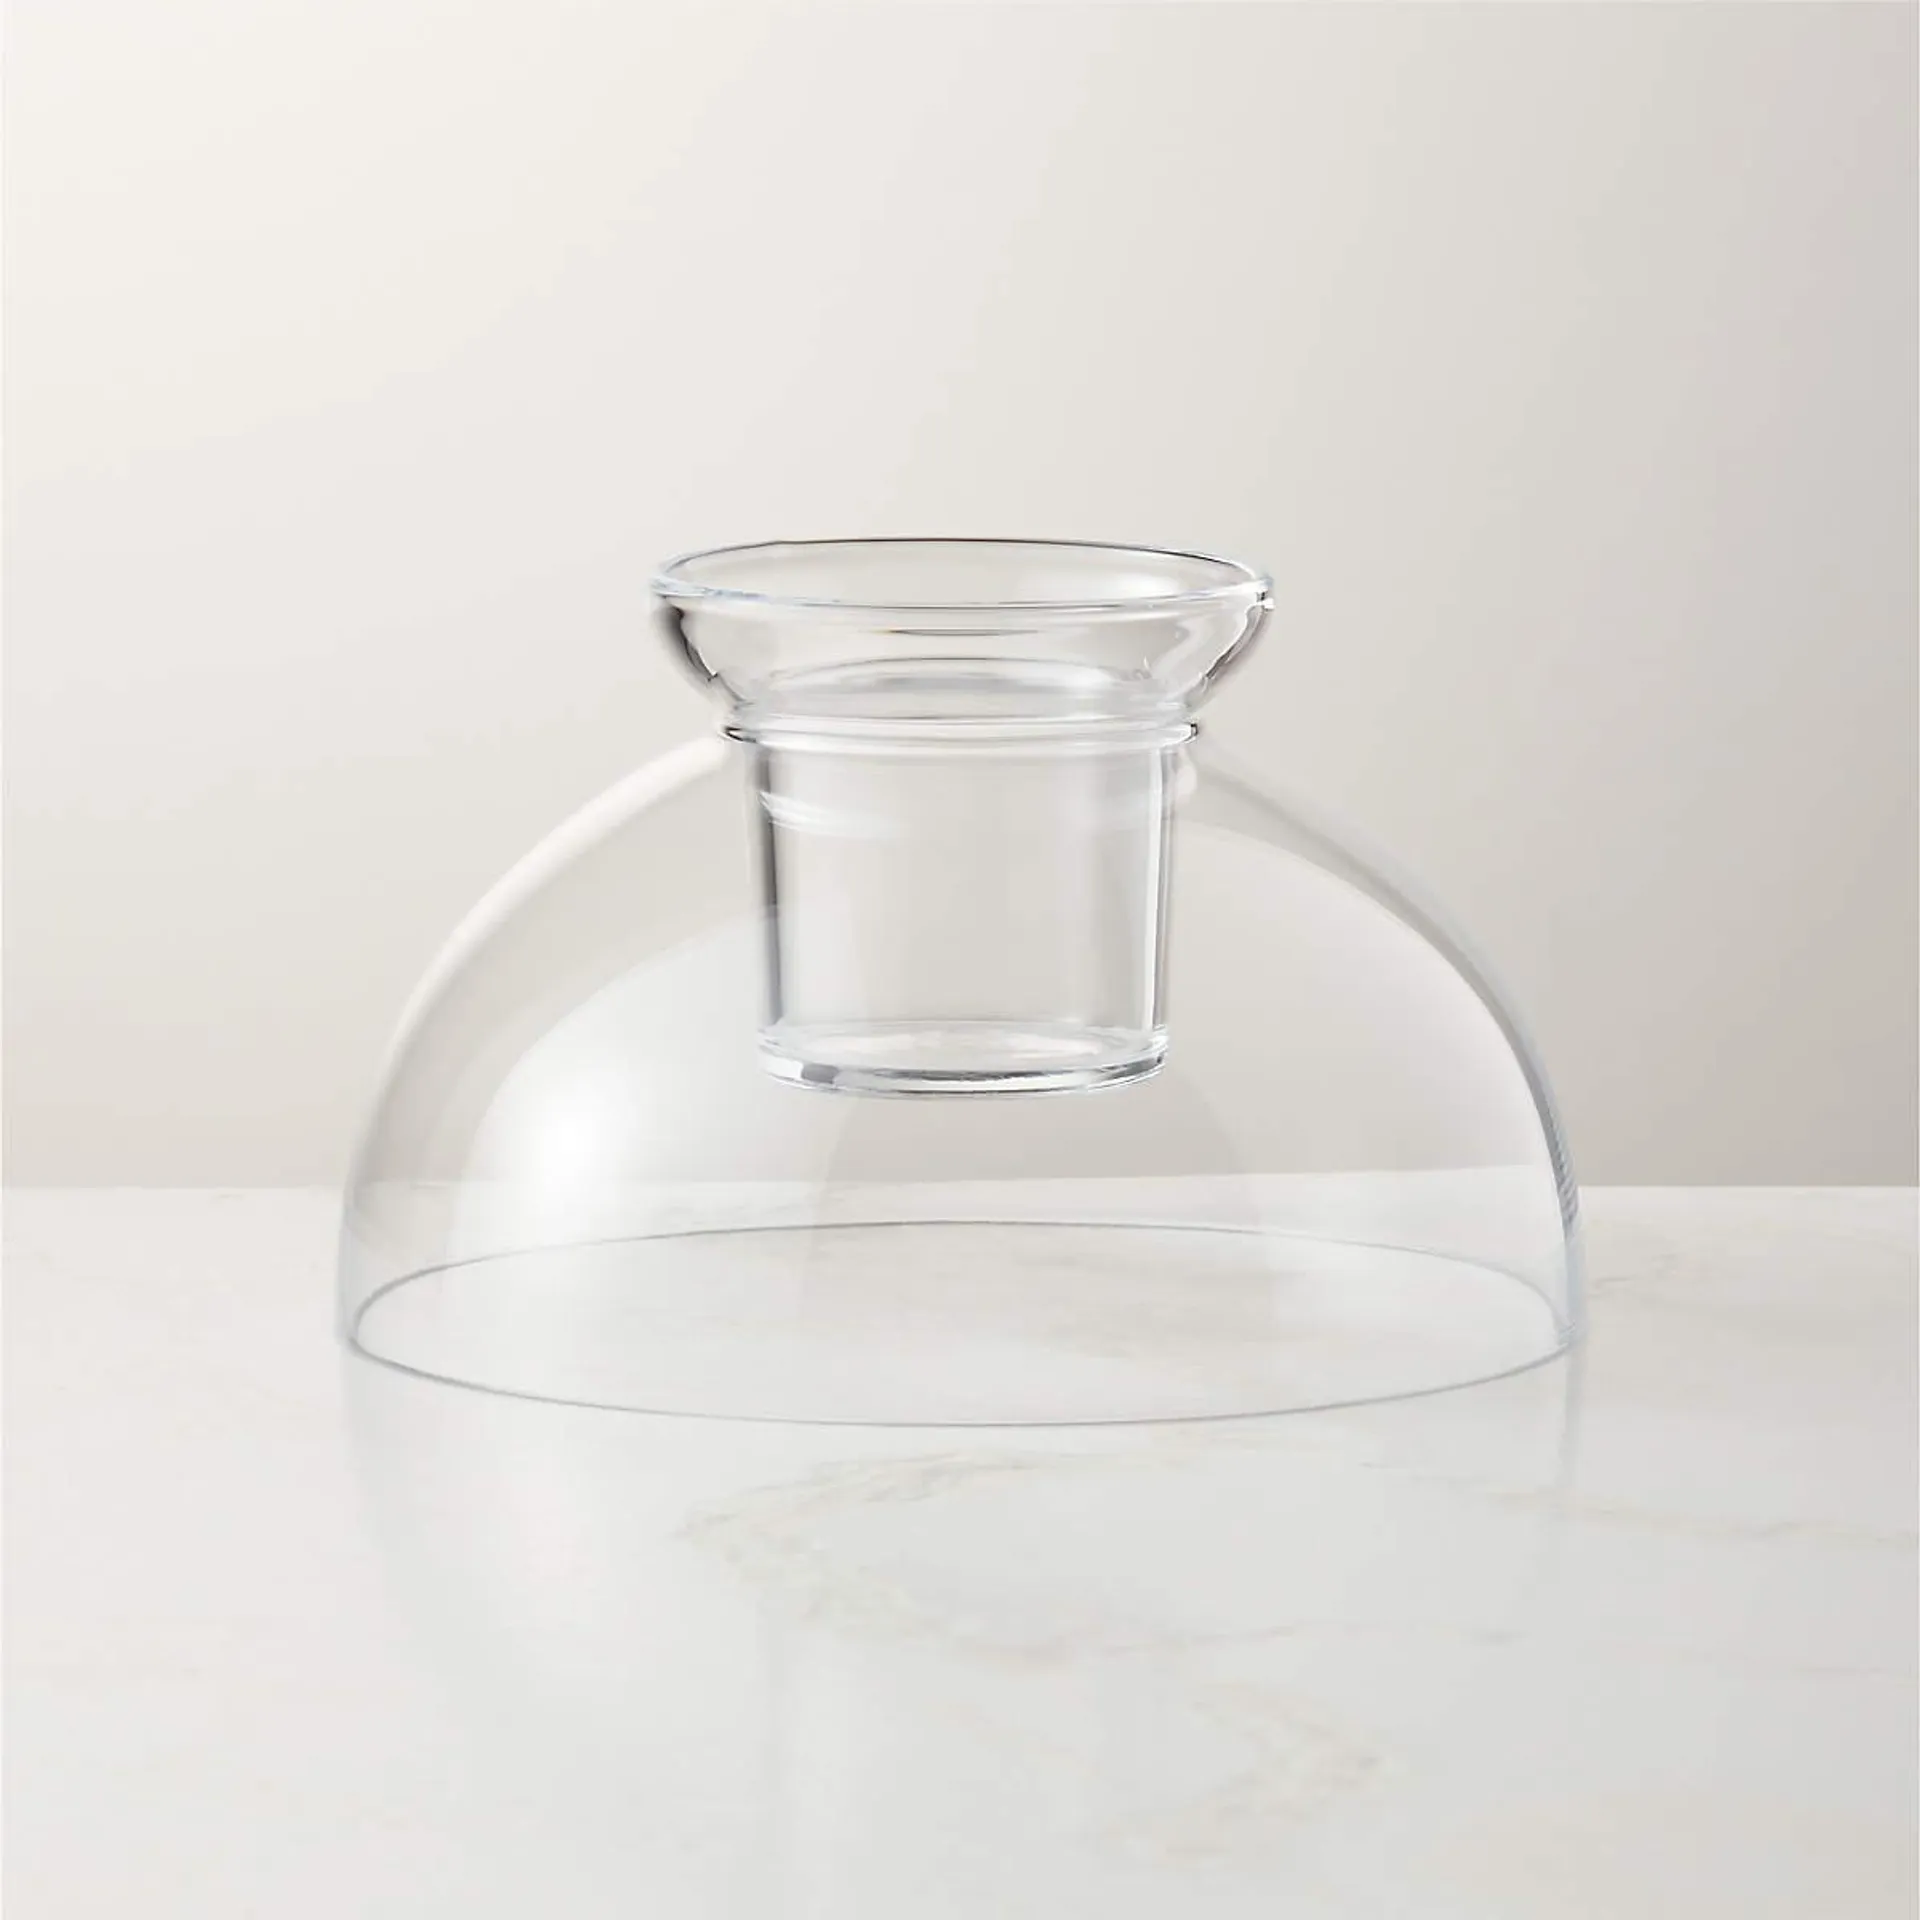 Bulbo Glass Tealight Candle Holder by Gianfranco Frattini